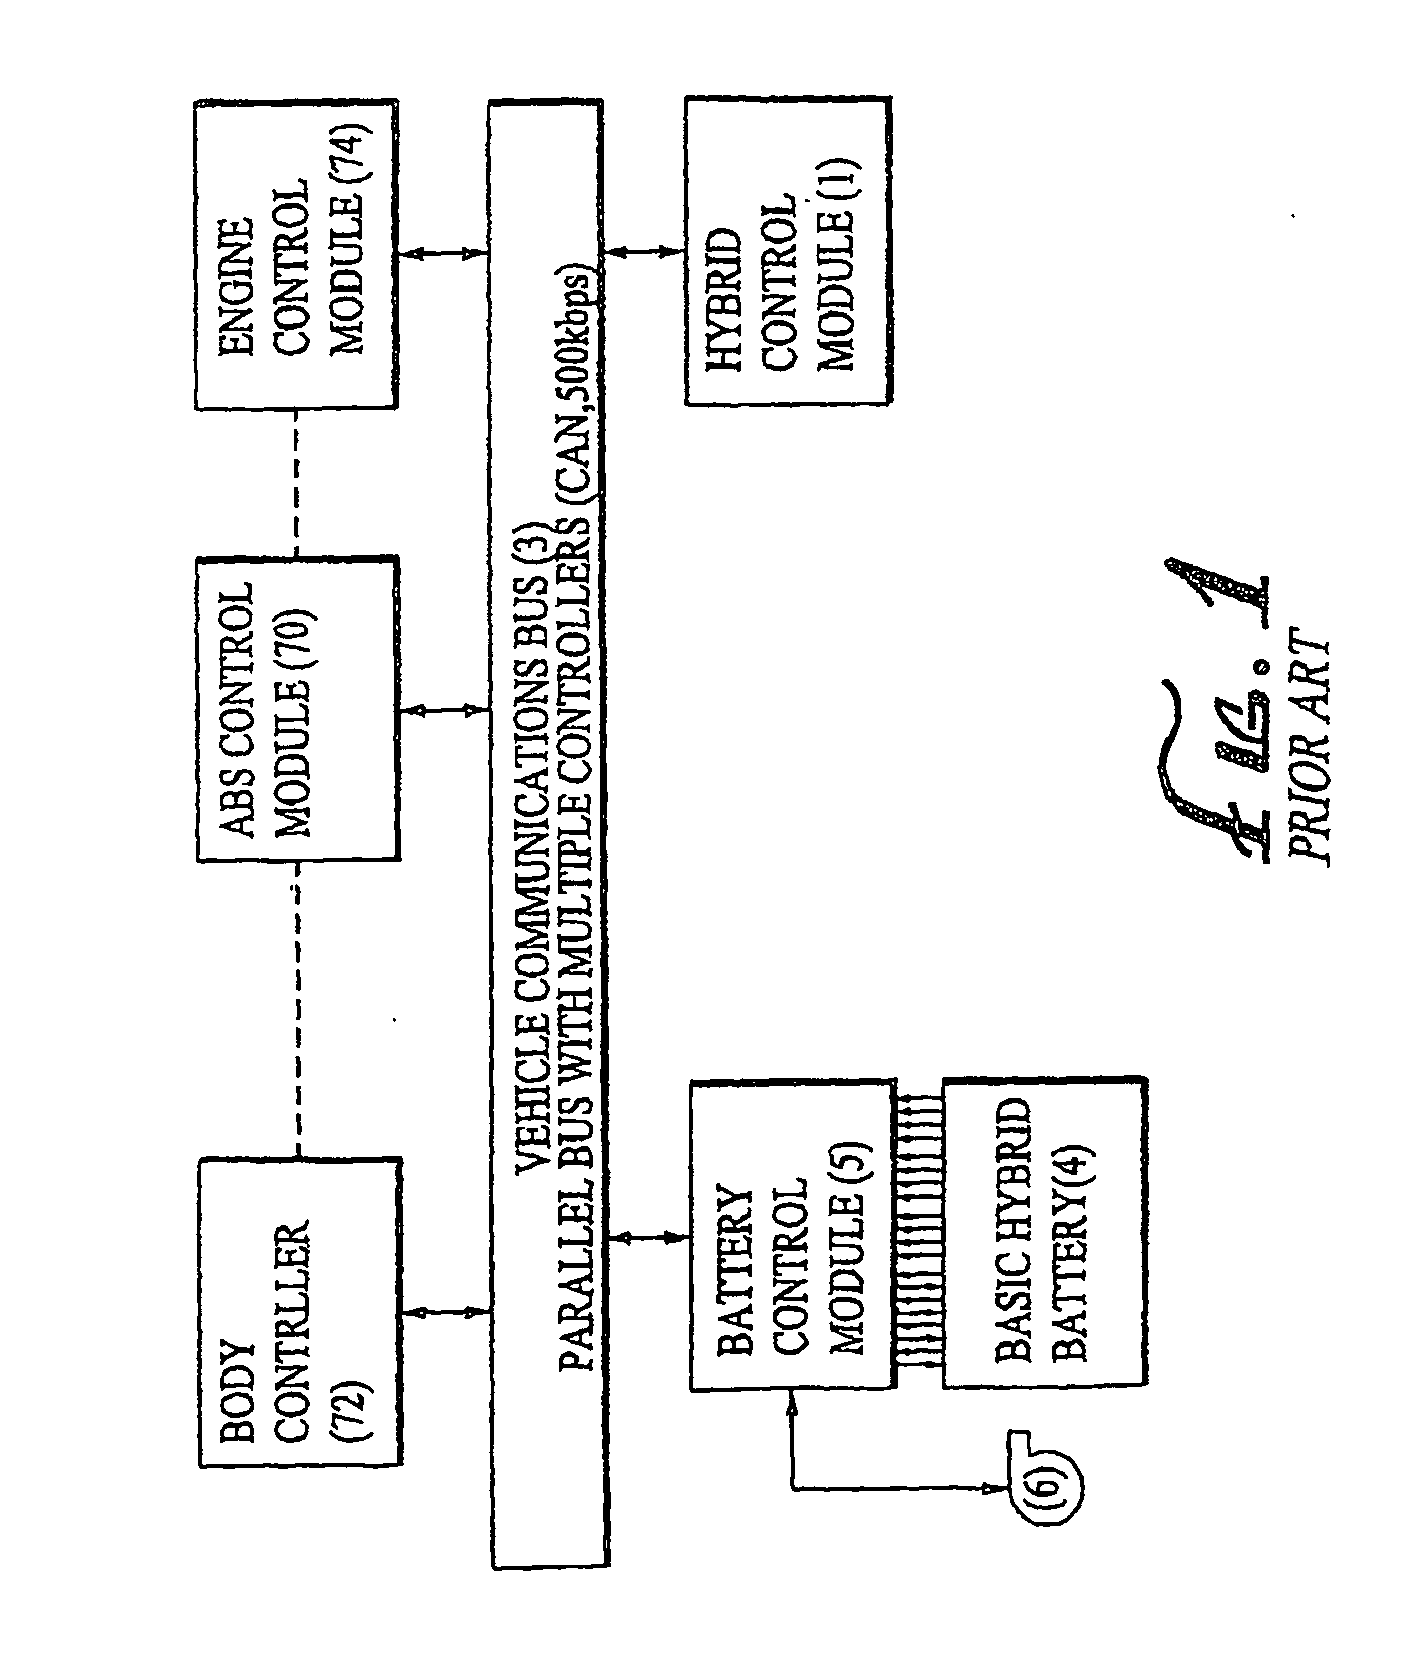 Method And System For Retrofitting A Full Hybrid To Be A Plug-In Hybrid